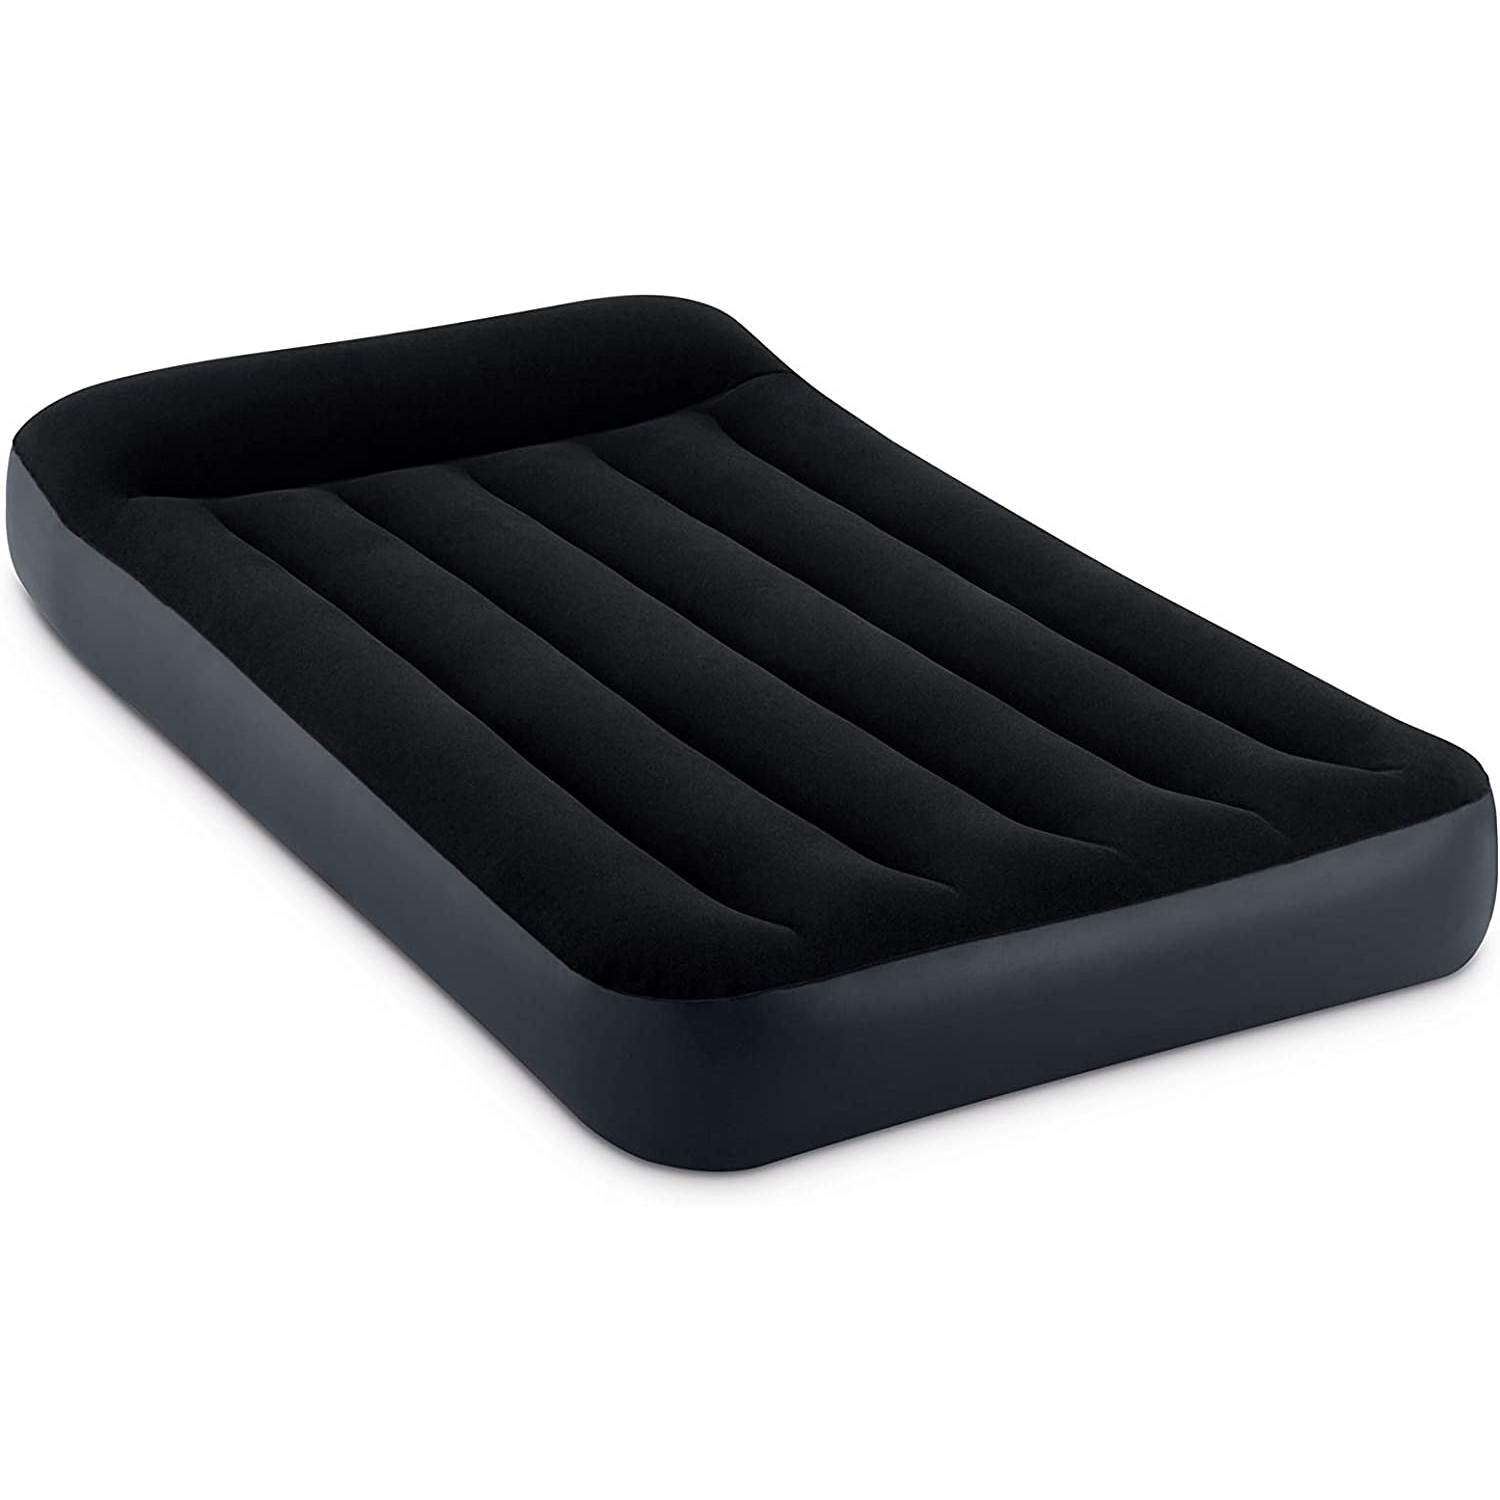 Photos - Other interior and decor Intex Dura Beam Standard Pillow Rest Classic Airbed with Internal Pump, Tw 